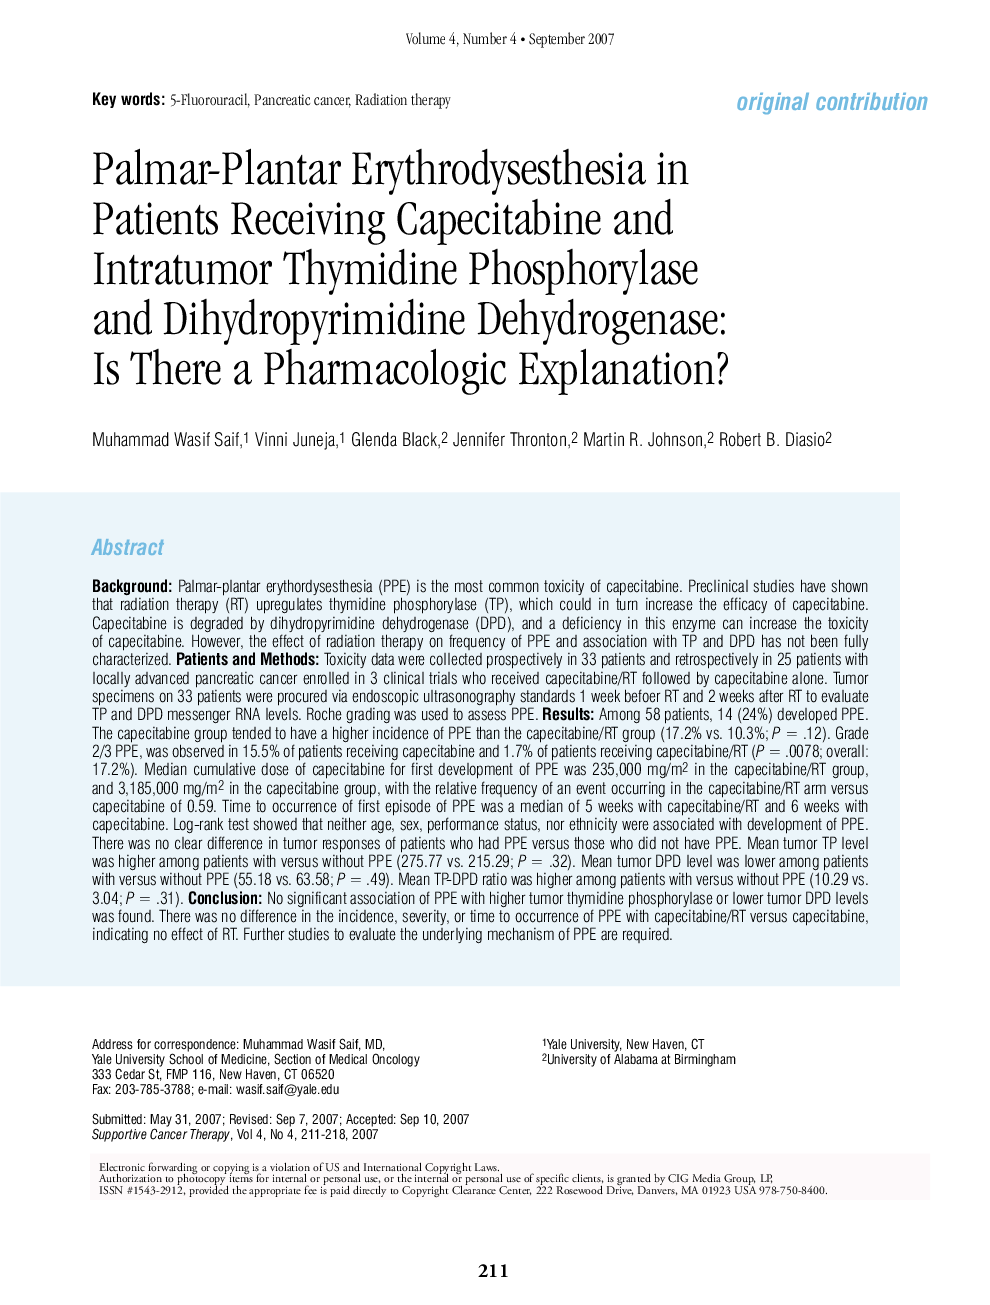 Palmar-Plantar Erythrodysesthesia in Patients Receiving Capecitabine and Intratumor Thymidine Phosphorylase and Dihydropyrimidine Dehydrogenase: Is There a Pharmacologic Explanation?